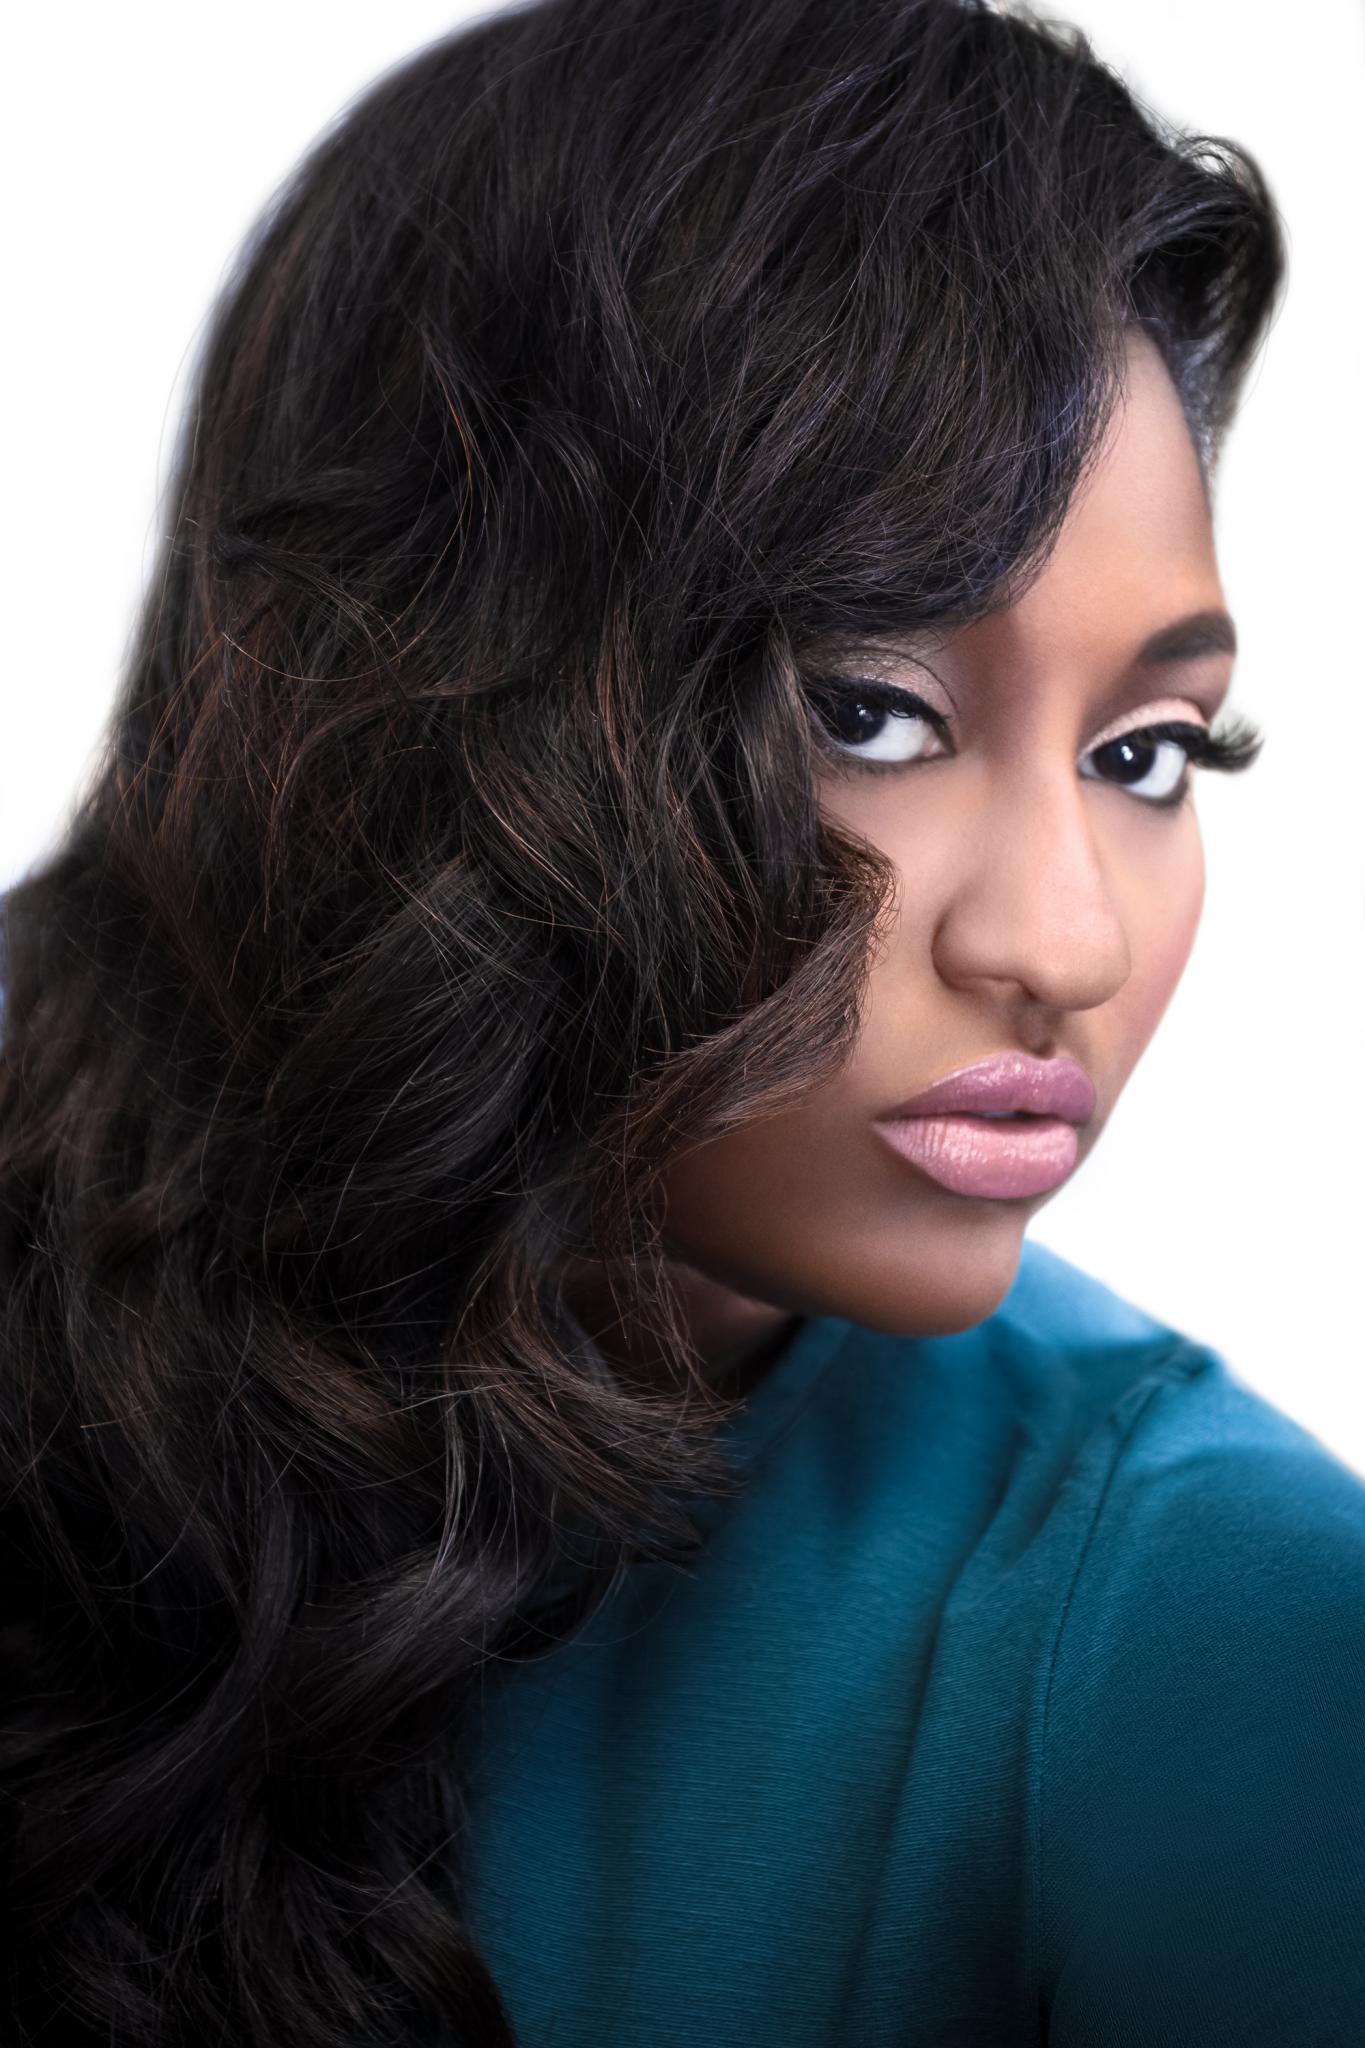 EXCLUSIVE: Jazmine Sullivan Admits She's Nervous About Her Tribute Performance to Kim Burrell